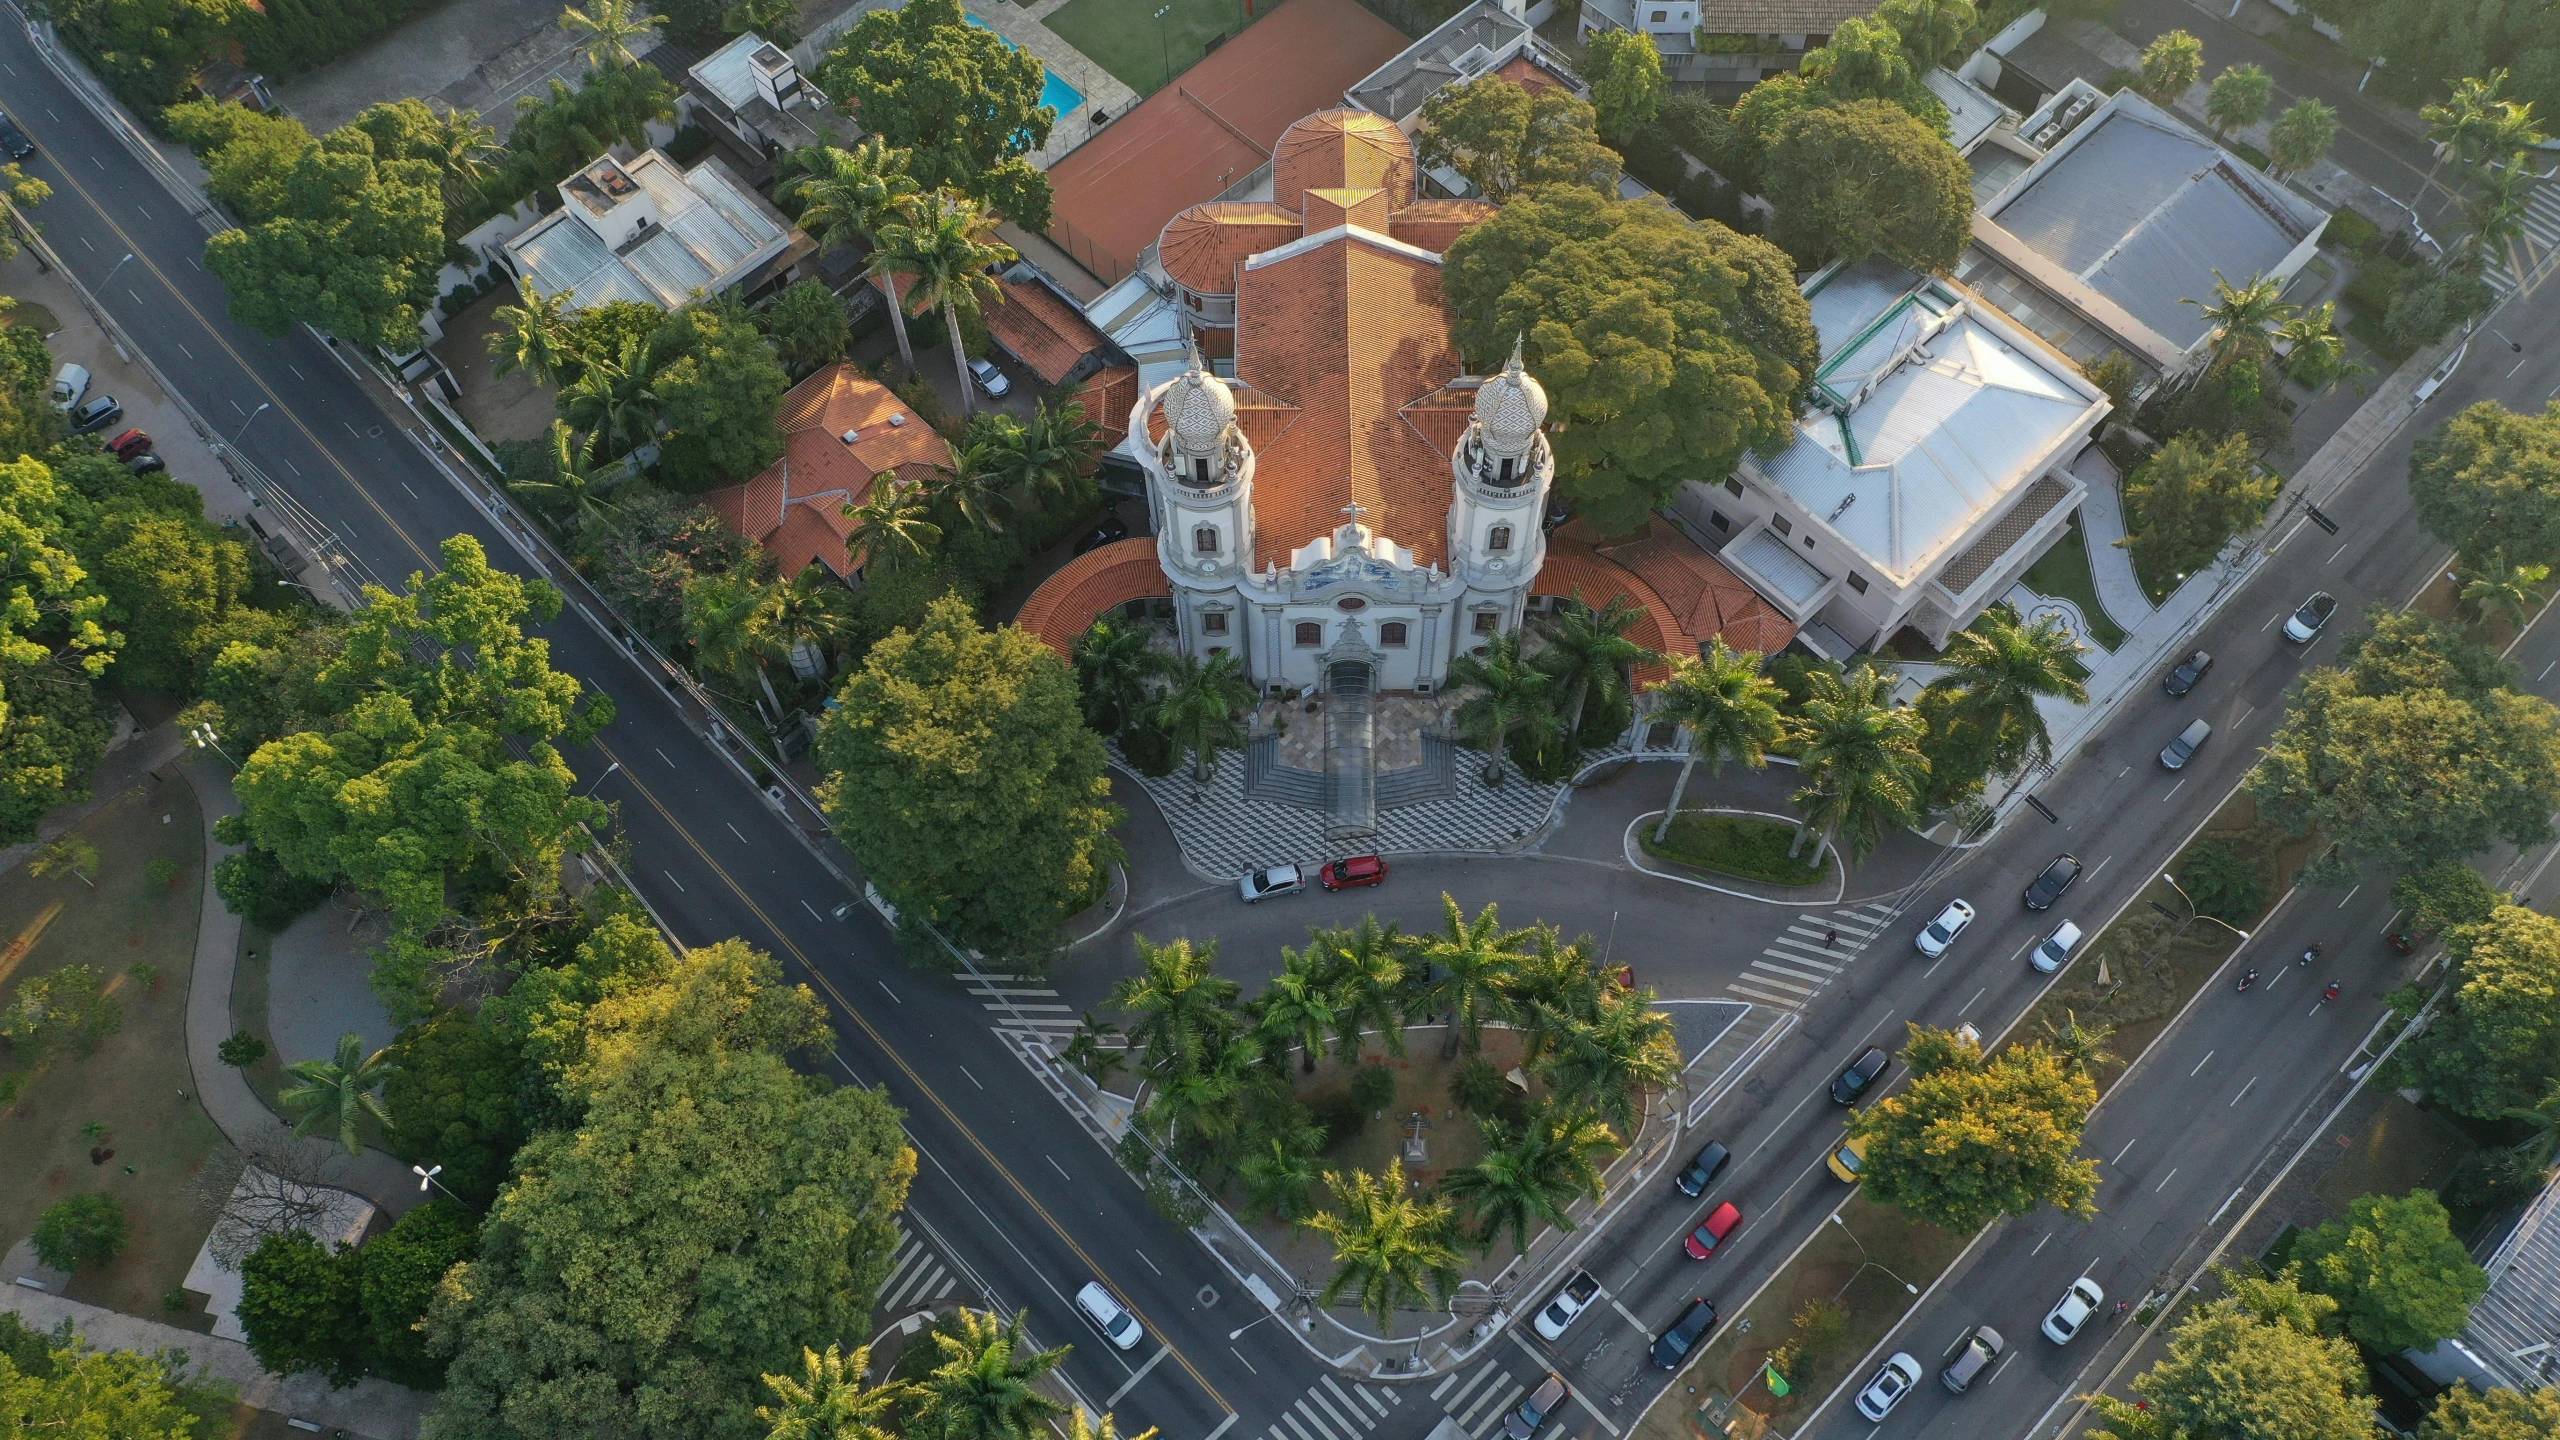 an aerial view of a church surrounded by trees, pexels contest winner, art nouveau, outdoors tropical cityscape, square, colonial, intersection